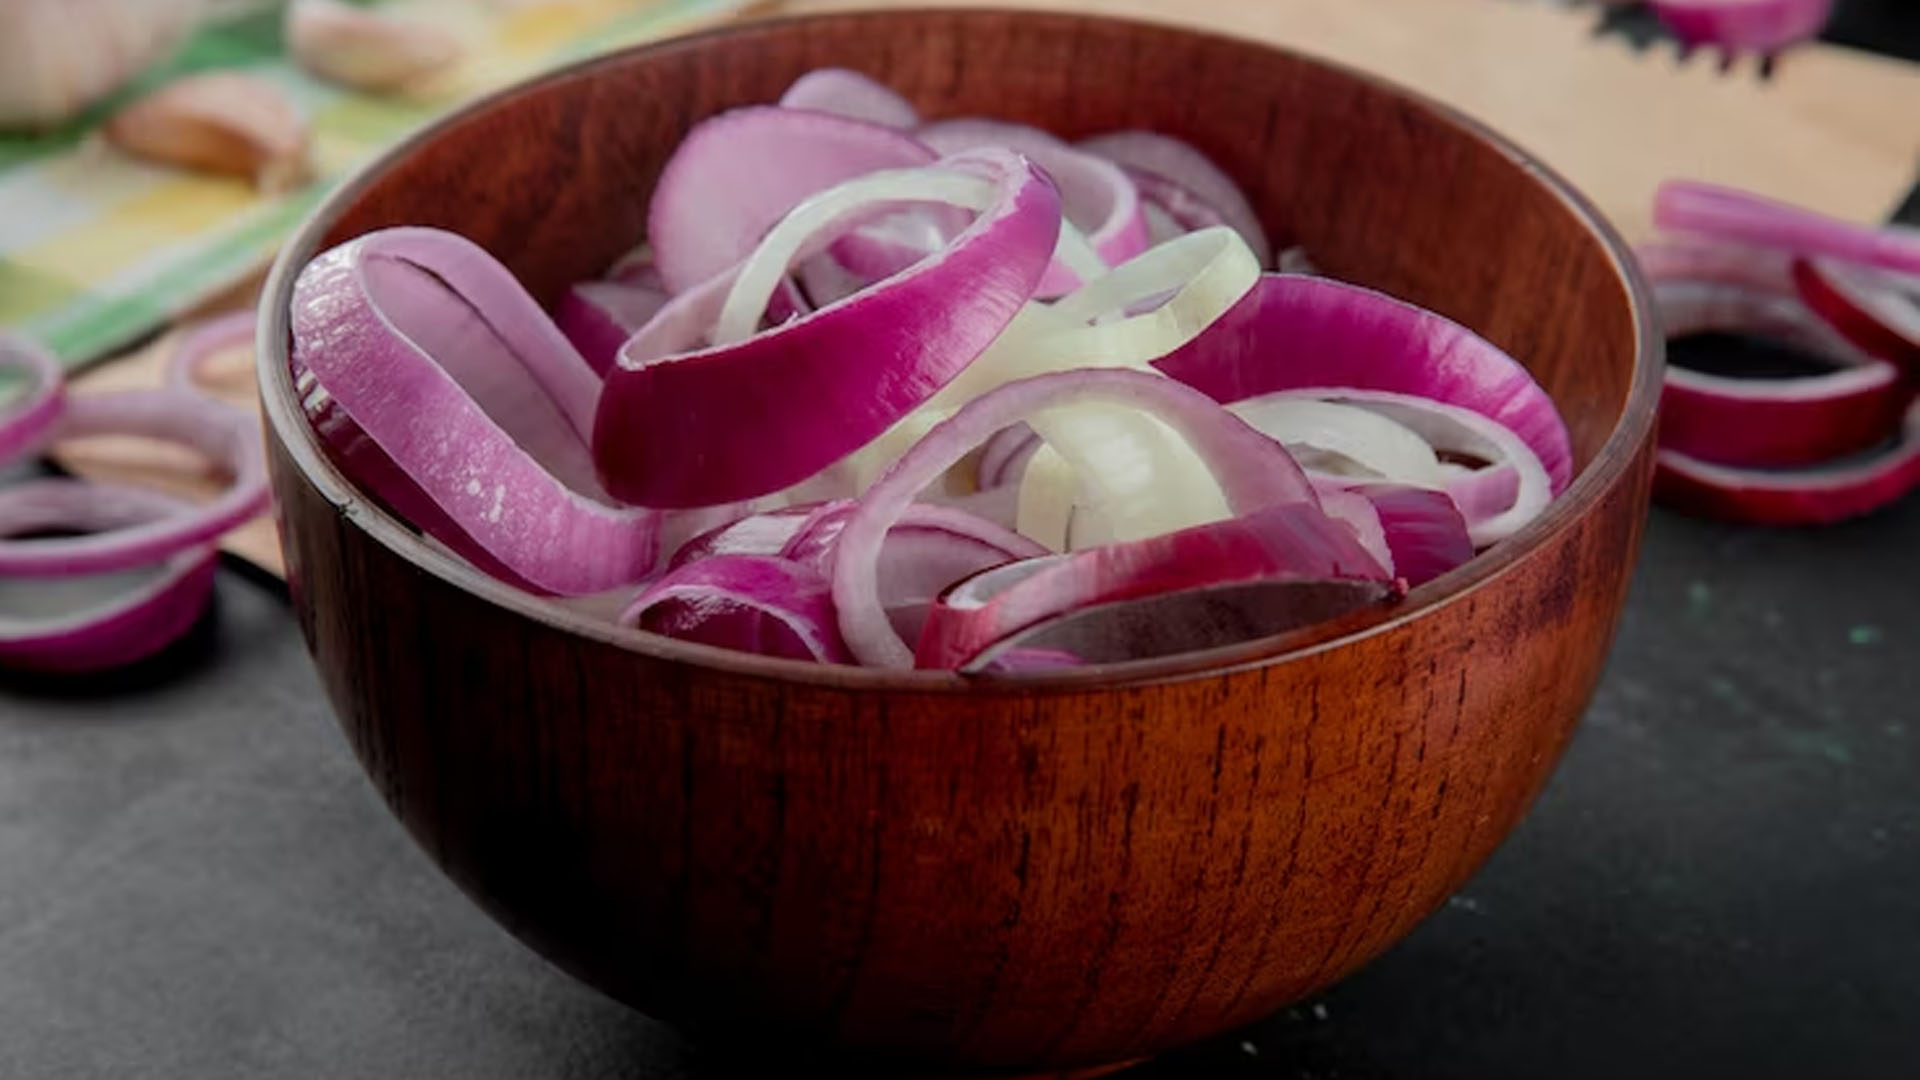 Do Pickled Onions Have Any Health Benefits?